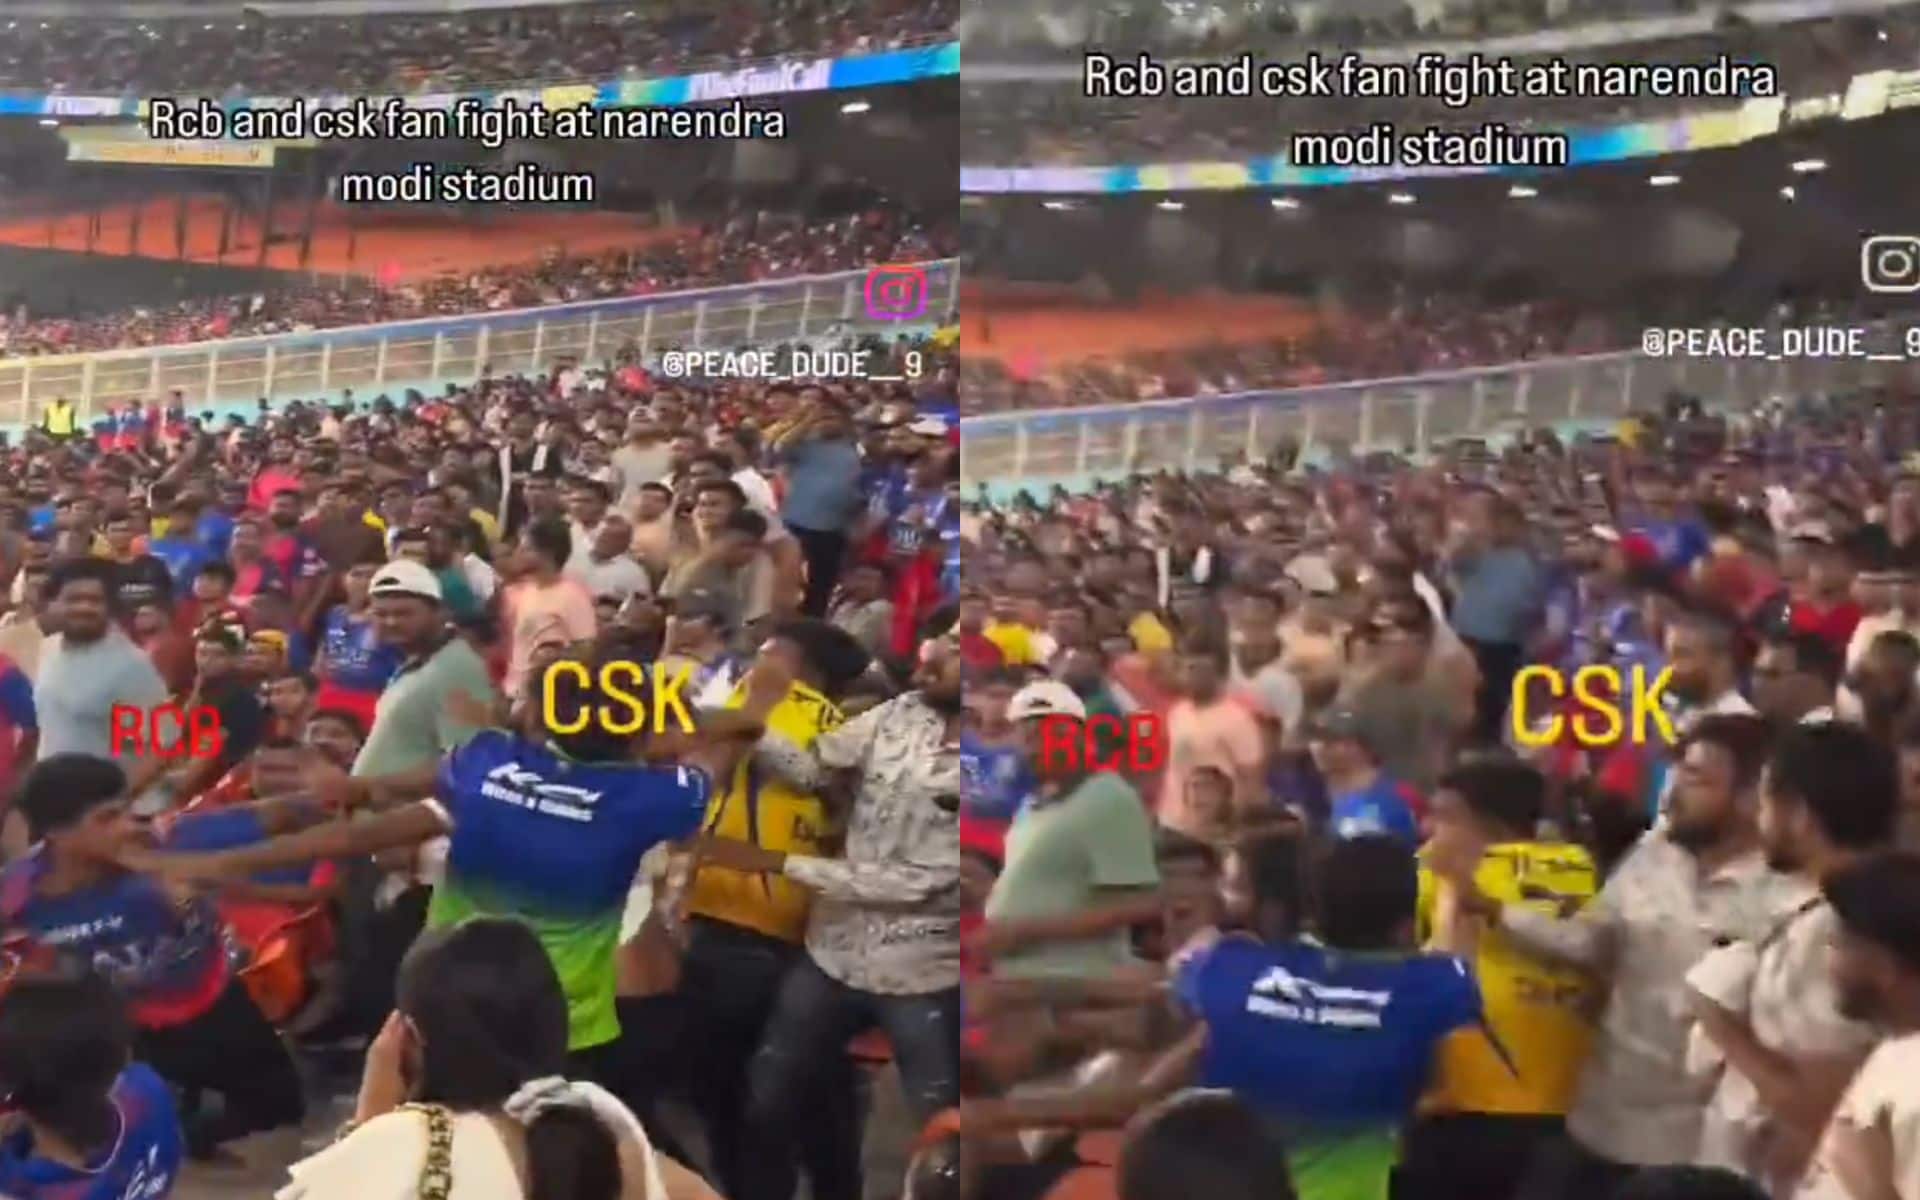 RCB Vs CSK fans involved in heated fighting (x)